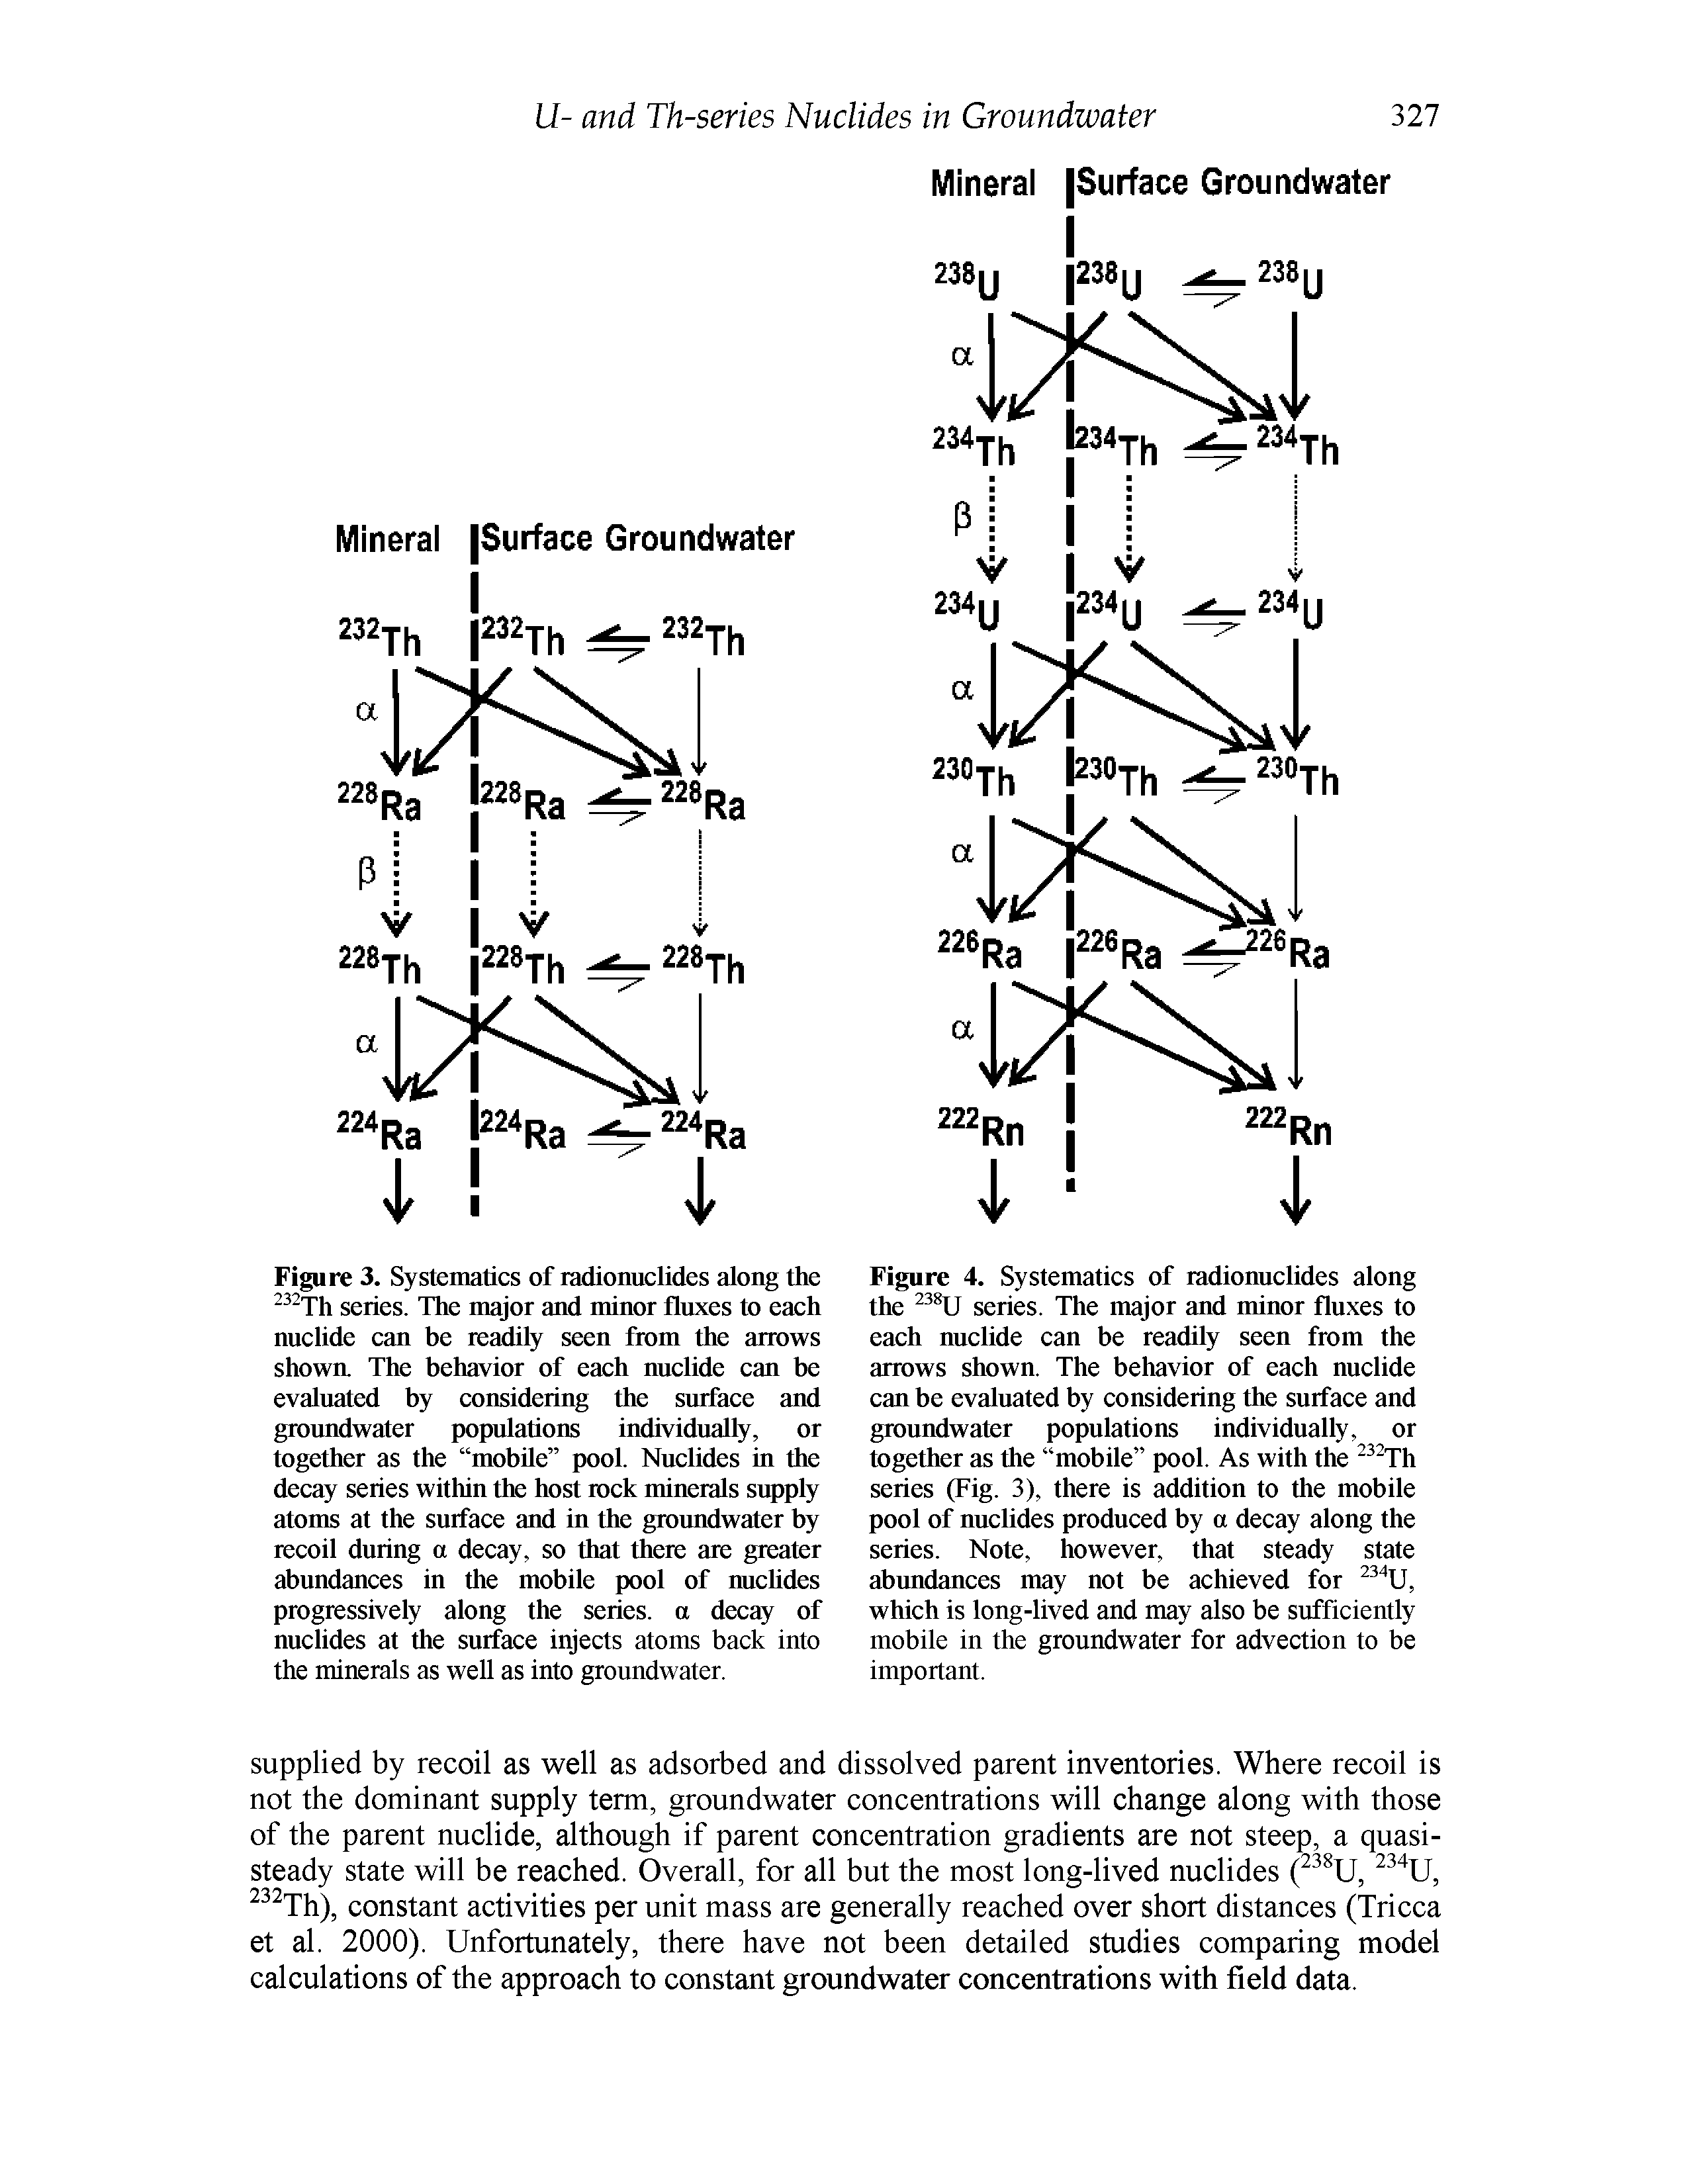 Figure 3. Systematics of radionuclides along the series. The major and minor fluxes to each nuclide can be readily seen from the arrows showm The behavior of each nuclide can be evaluated by considering the surface and groundwater populations individually, or together as the mobile pool. Nuclides in the decay series within the host rock minerals supply atoms at the surface and in the groundwater by recoil during a decay, so that there are greater abundances in the mobile pool of nuchdes progressively along the series, a decay of nuclides at the surface injects atoms back into the minerals as well as into groundwater.